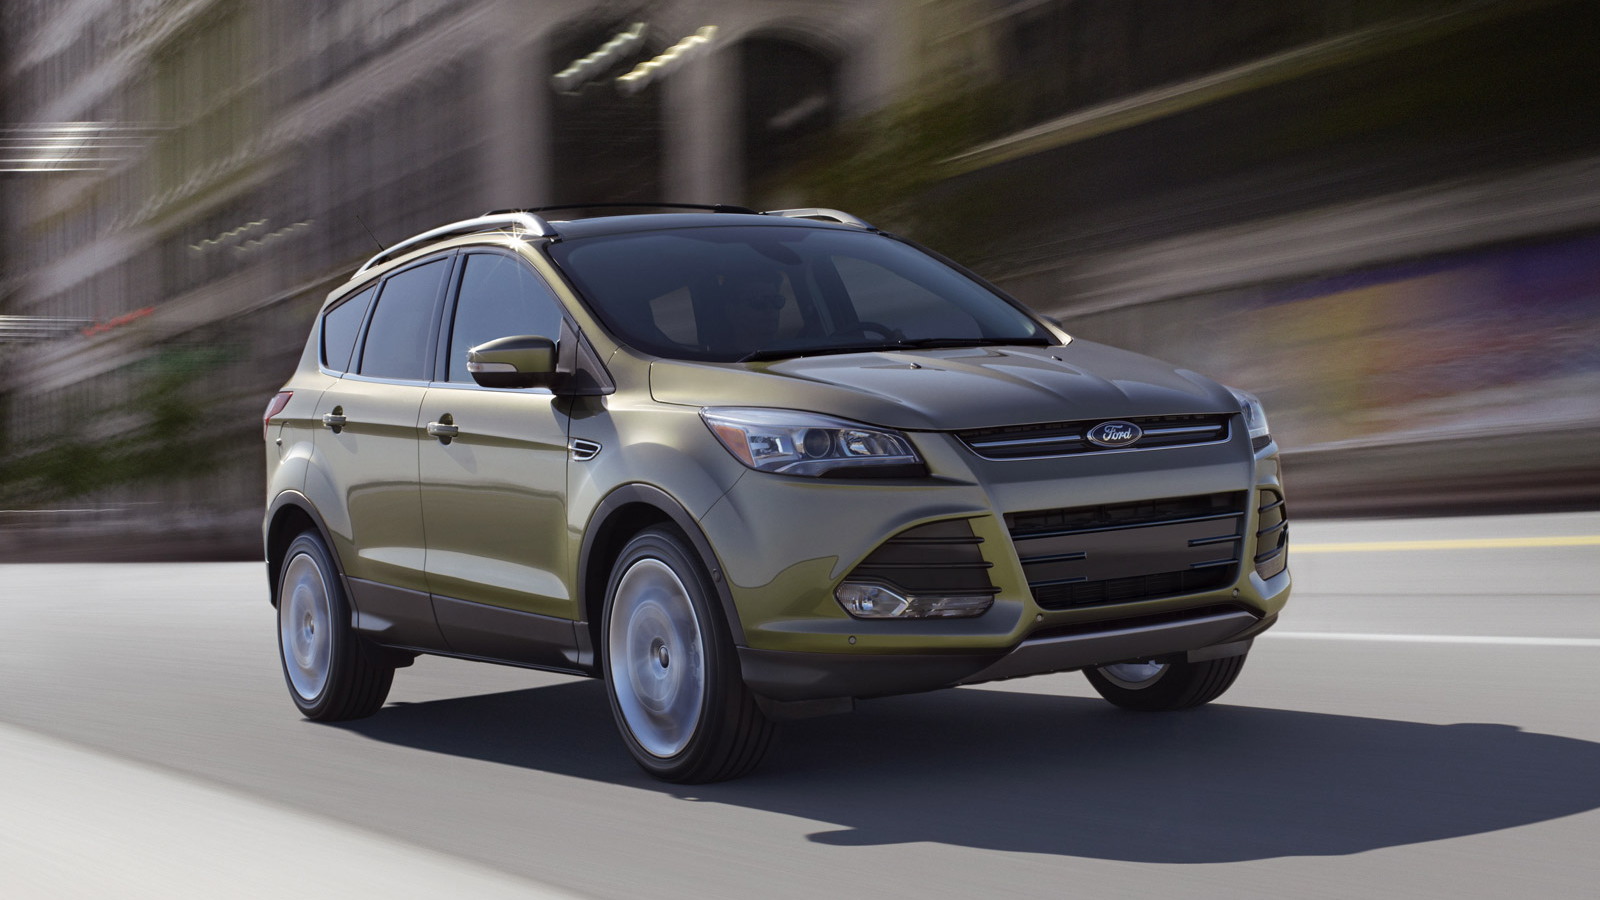 2013 Ford Escape (Kuga) Debuts At 2011 Los Angeles Auto Show
